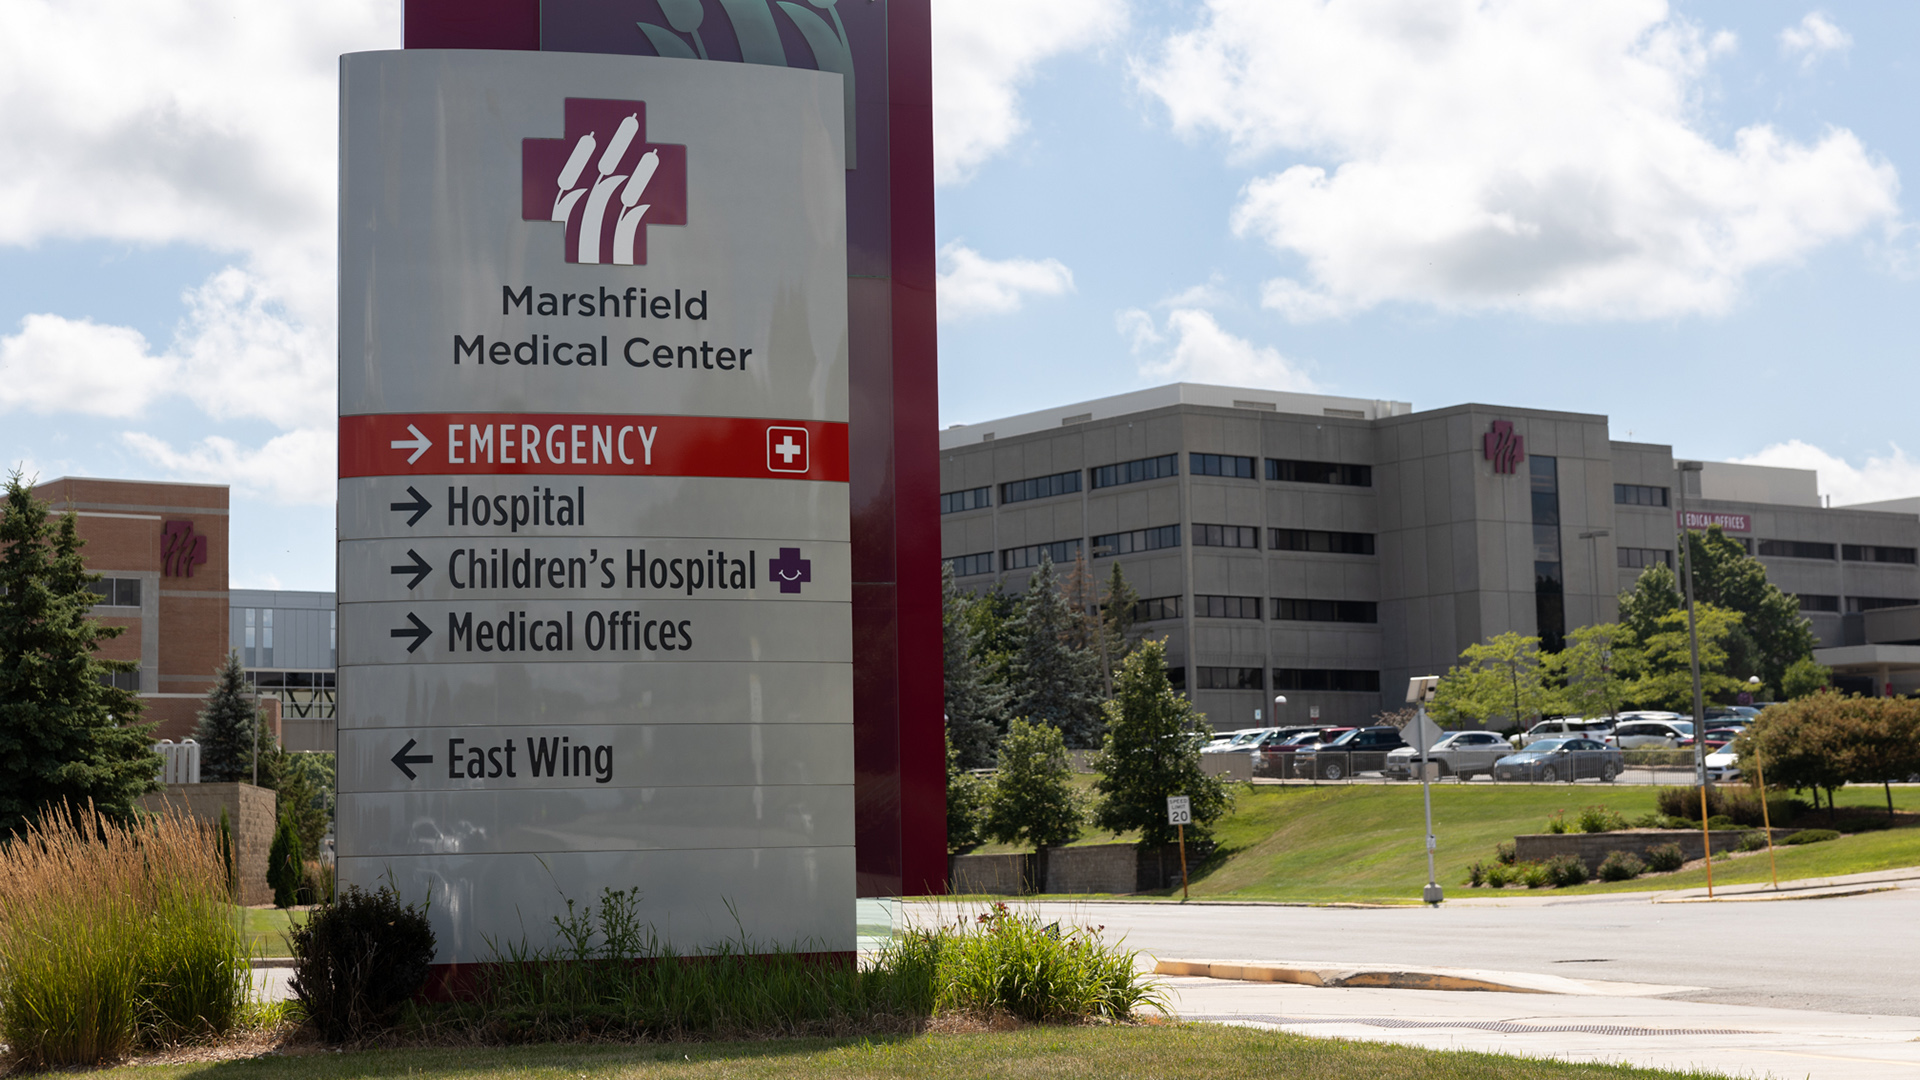 A direction sight for Marshfield Medical Center shows arrows pointing toward the locations for Emergency, Hospital, Children's Hospital, Medical Offices and East Wing, with a road, parking lot, trees and multi-story building in the background.